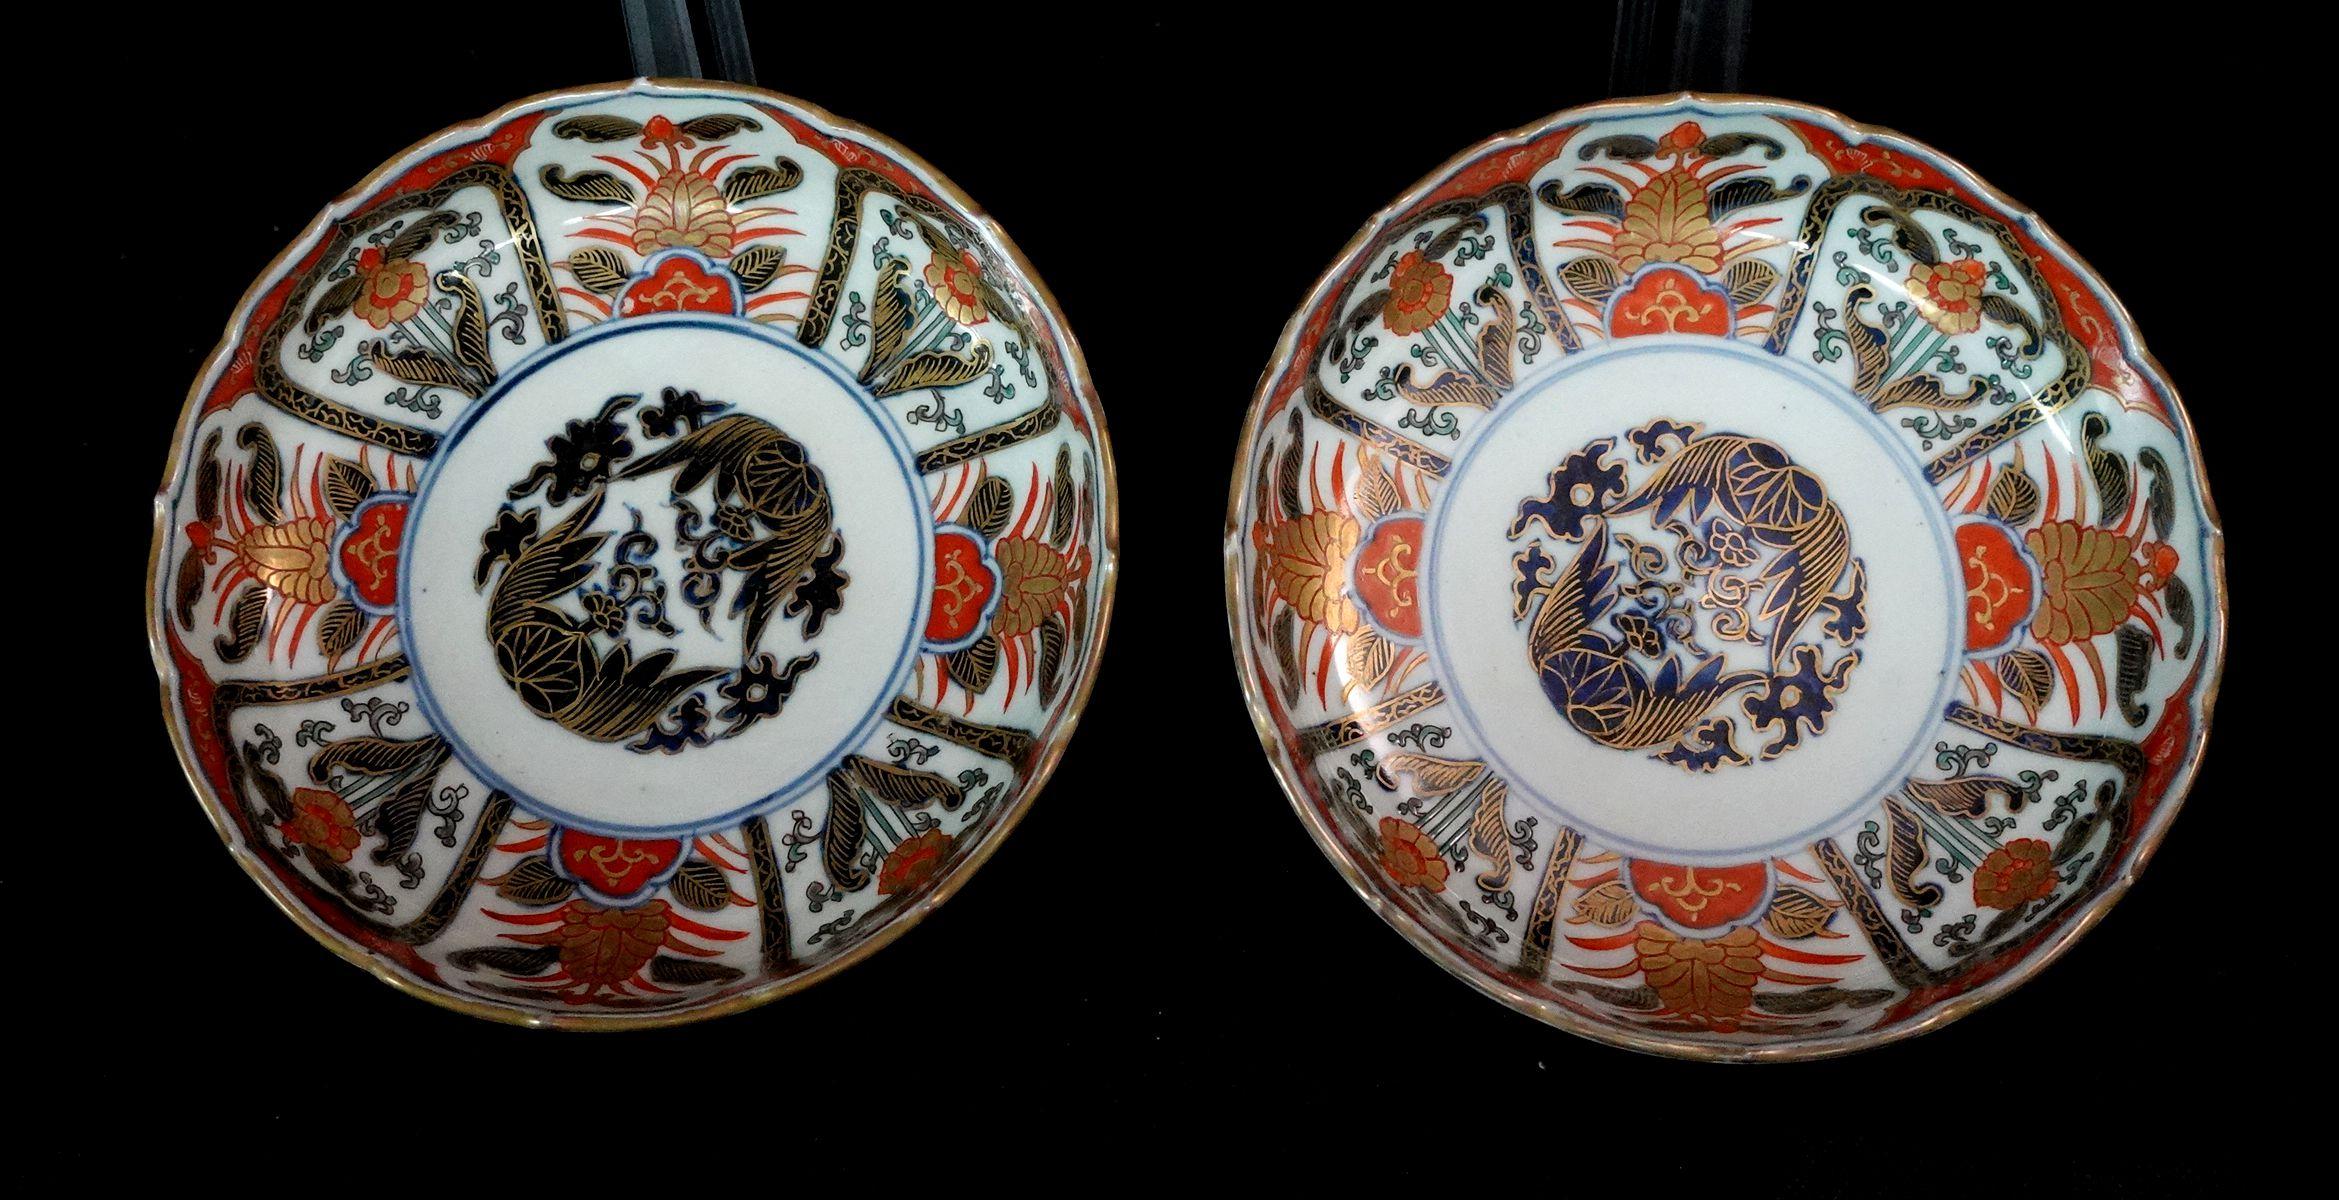 A Pair of Japanese Imari Plates from the Maji period of the 19th Century with different gilt floral designs in 8 different patterns surrounding the entire plater and a painting of mythological painting dominating the center part forming the typical